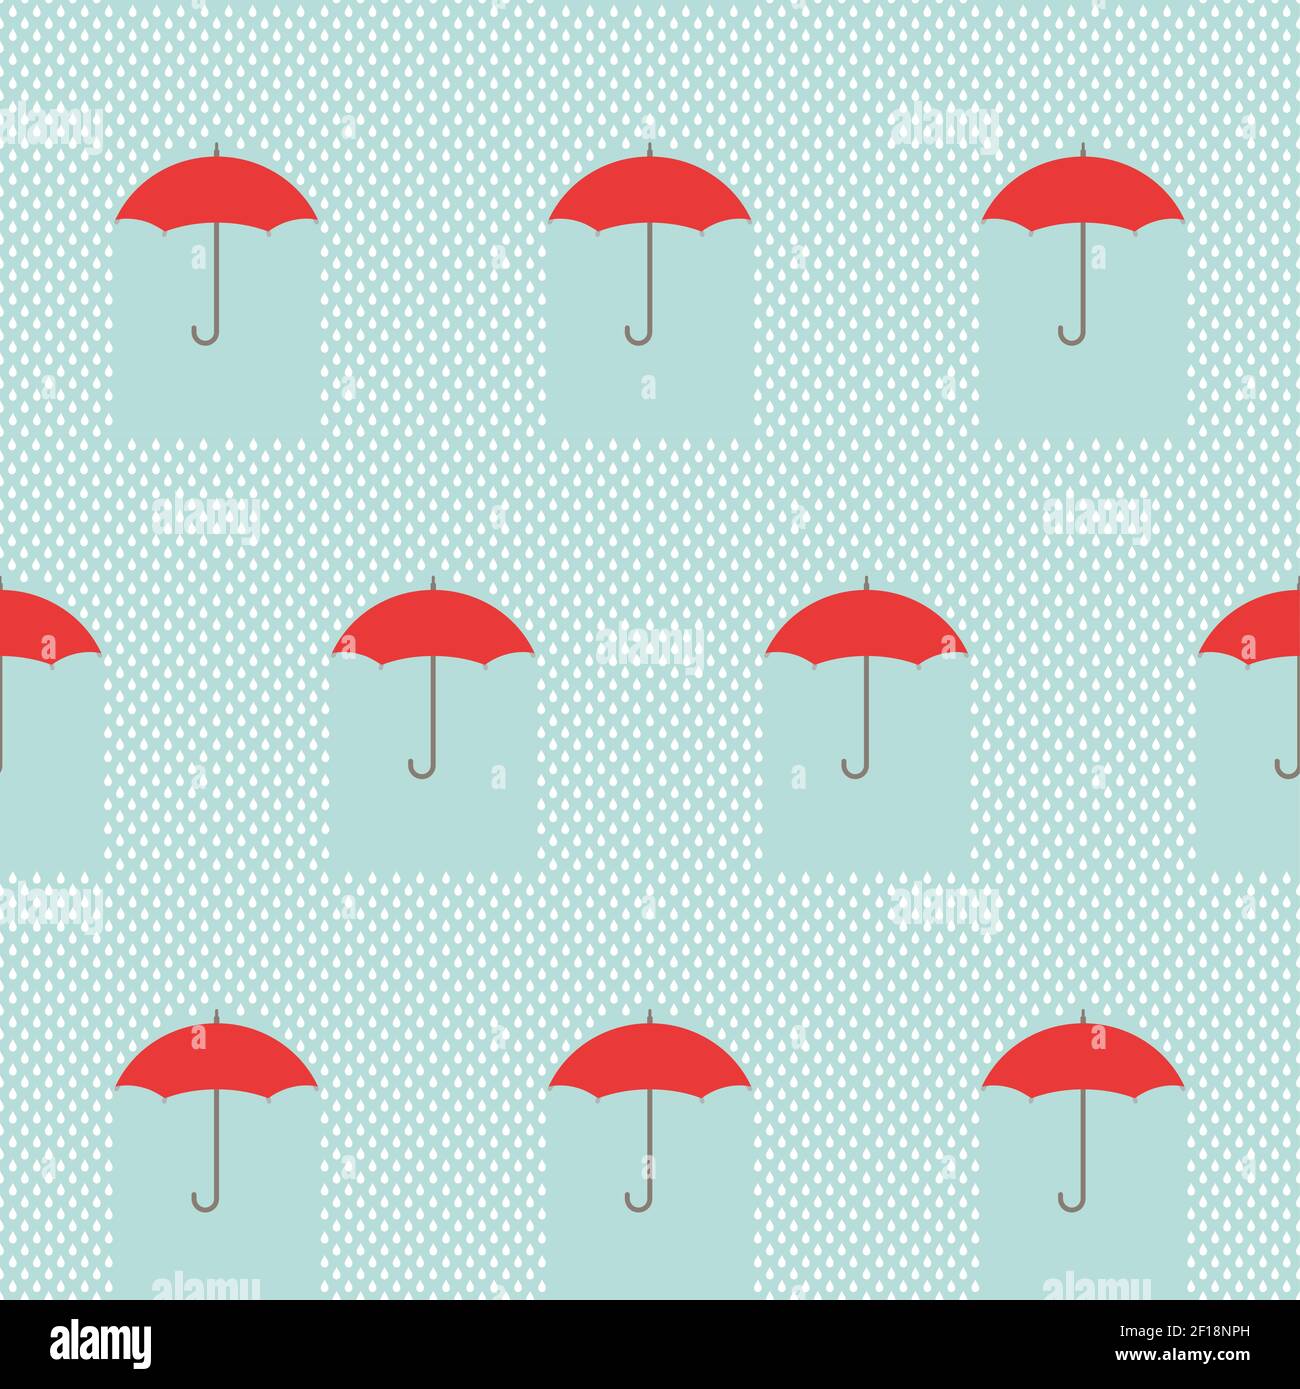 Seamless background with raindrops and red umbrellas on blue sky ...